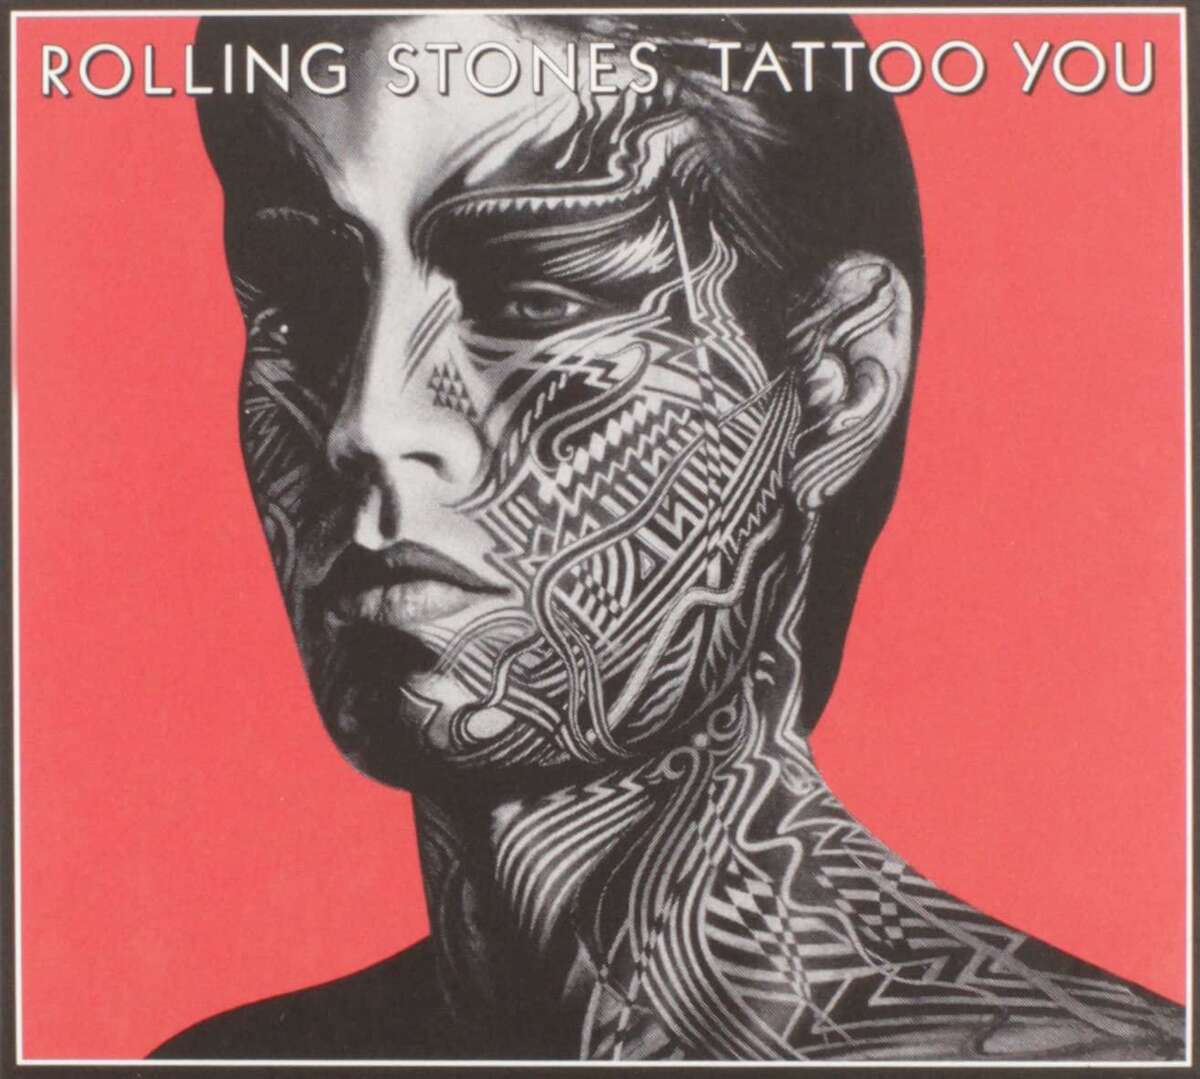 Rolling Stones' Tattoo You